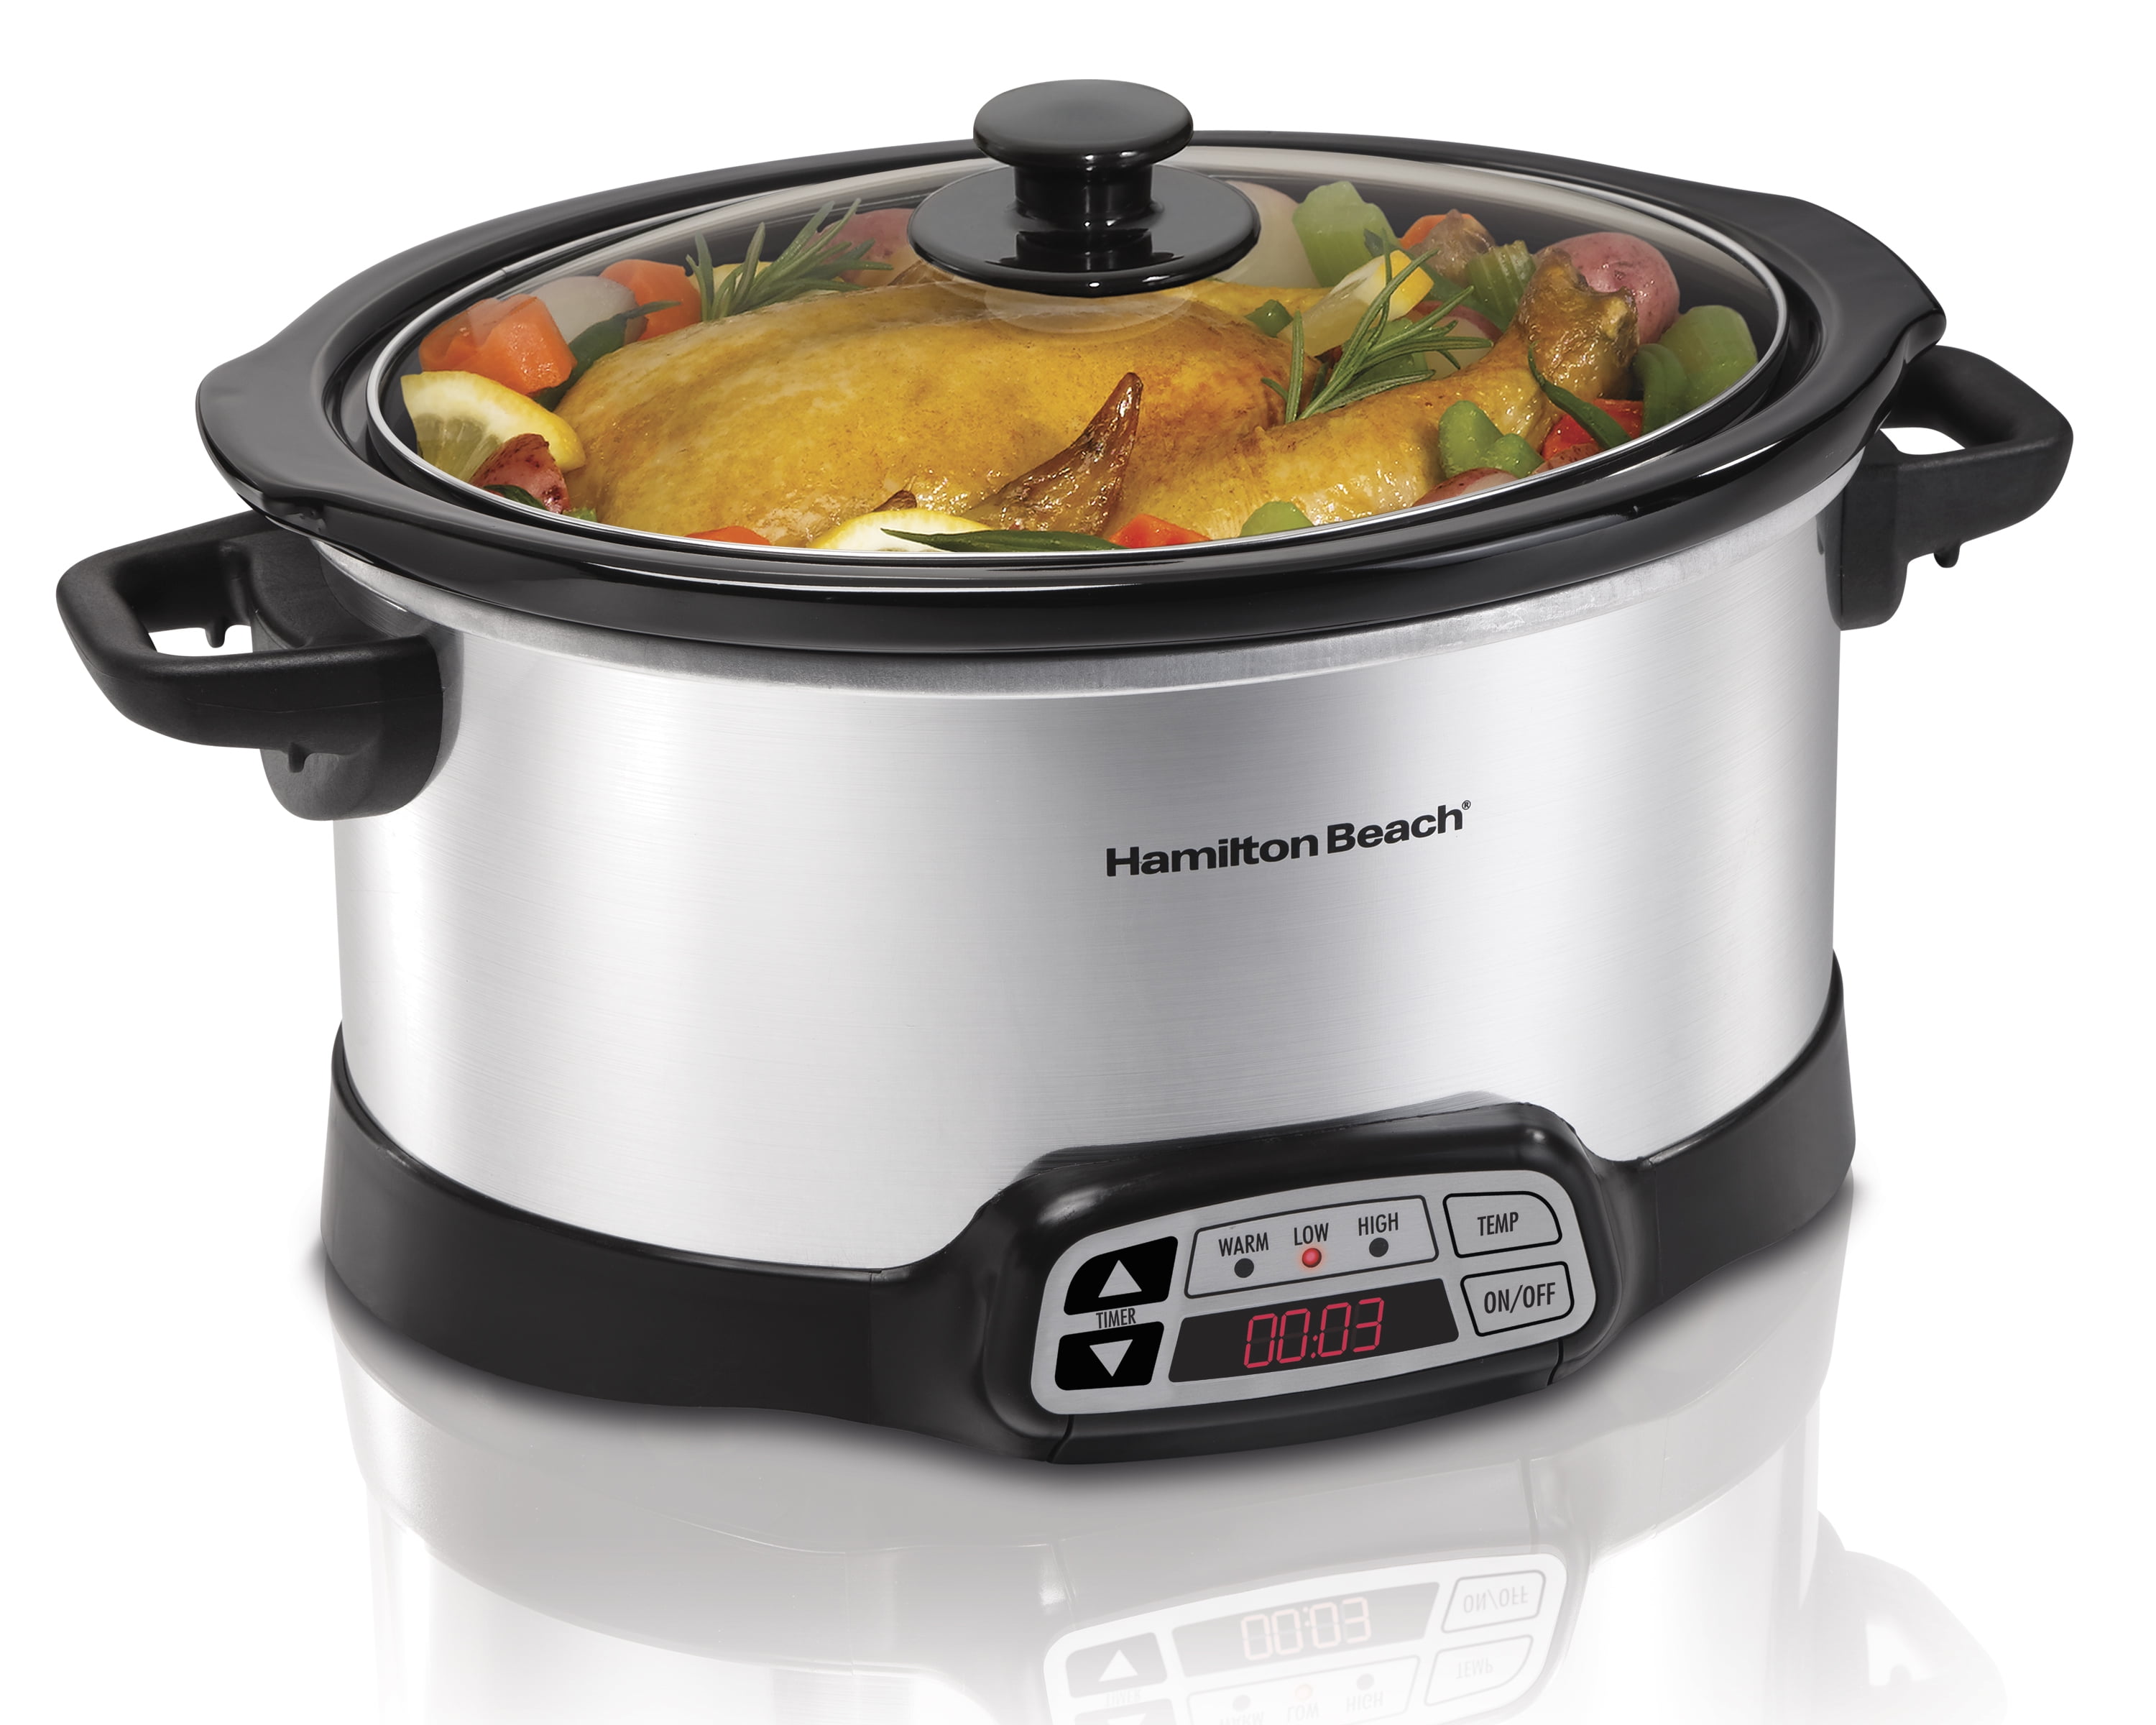  Hamilton Beach 6-Quart Slow Cooker with 3 Cooking Settings,  Dishwasher-Safe Stoneware Crock & Glass Lid, Silver (33665G): Home & Kitchen